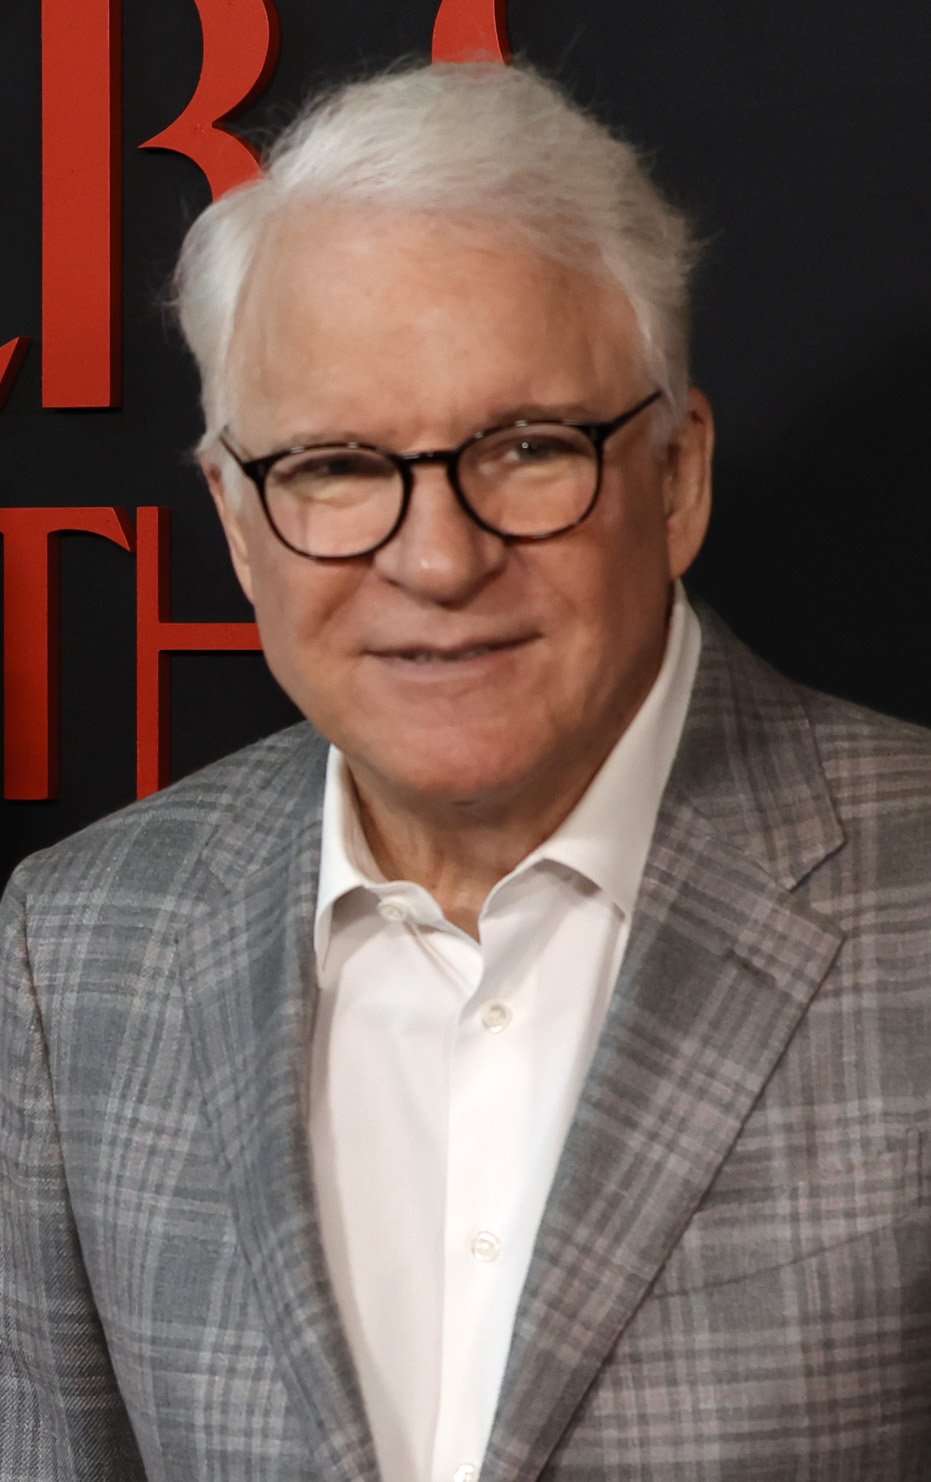  Steve Martin attends Los Angeles Premiere Of "Only Murders In The Building" Season 2 at DGA Theater Complex on June 27, 2022 in Los Angeles, California. | Source: Getty Images